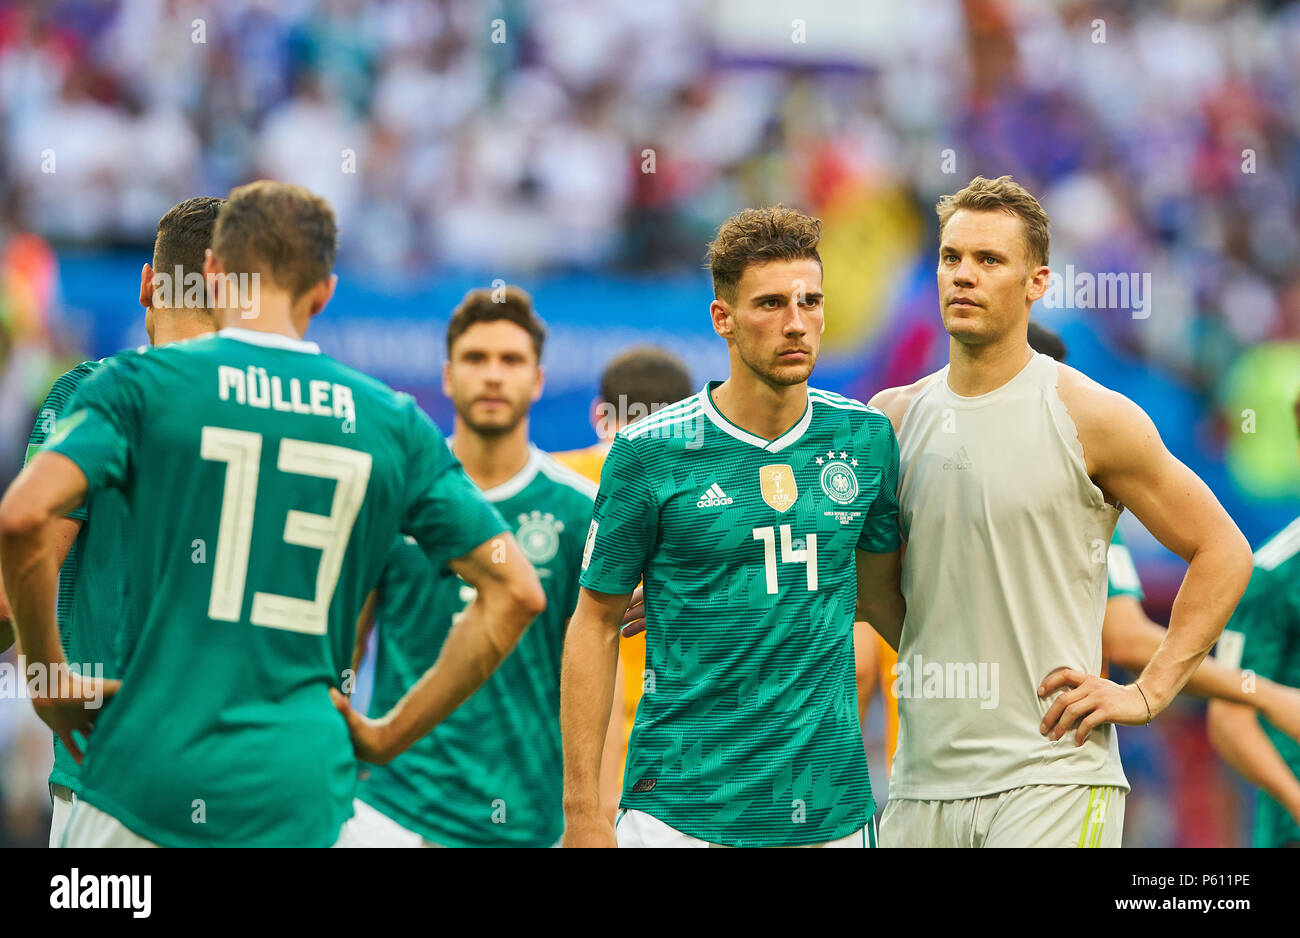 Germany - South Korea, Soccer, Kazan, June 27, 2018 Leon GORETZKA, DFB 14 Manuel NEUER, DFB 1 goalkeeper, sad, disappointed, angry, Emotions, disappointment, frustration, frustrated, sadness, desperate, despair,  GERMANY - KOREA REPUBLIC 0-2  FIFA WORLD CUP 2018 RUSSIA, Group F, Season 2018/2019,  June 27, 2018  Stadium K a z a n - A r e n a in Kazan, Russia. © Peter Schatz / Alamy Live News Stock Photo